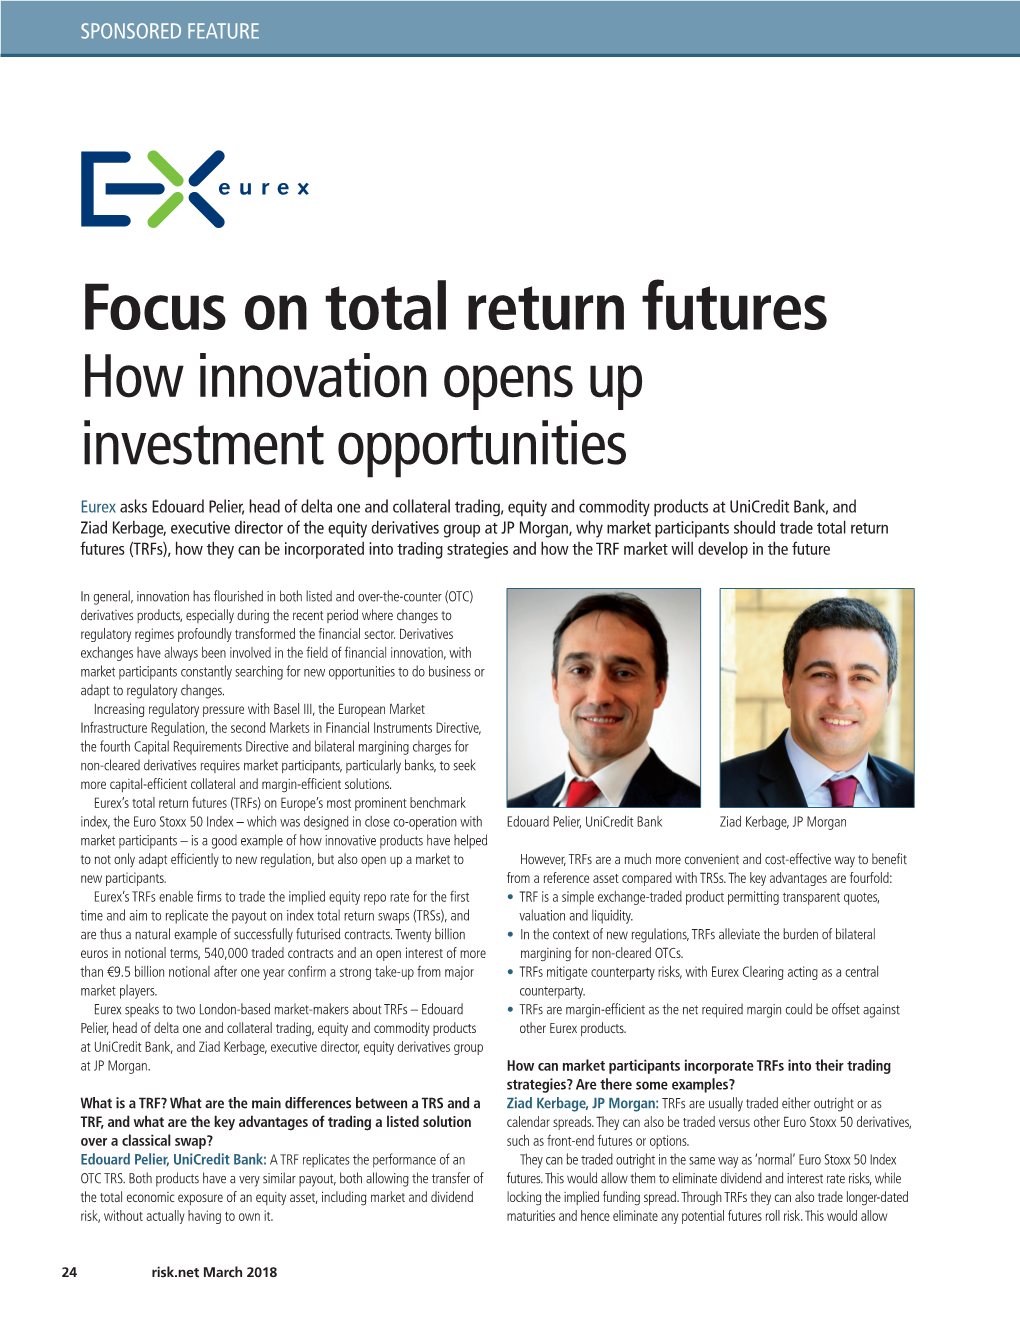 Focus on Total Return Futures How Innovation Opens up Investment Opportunities